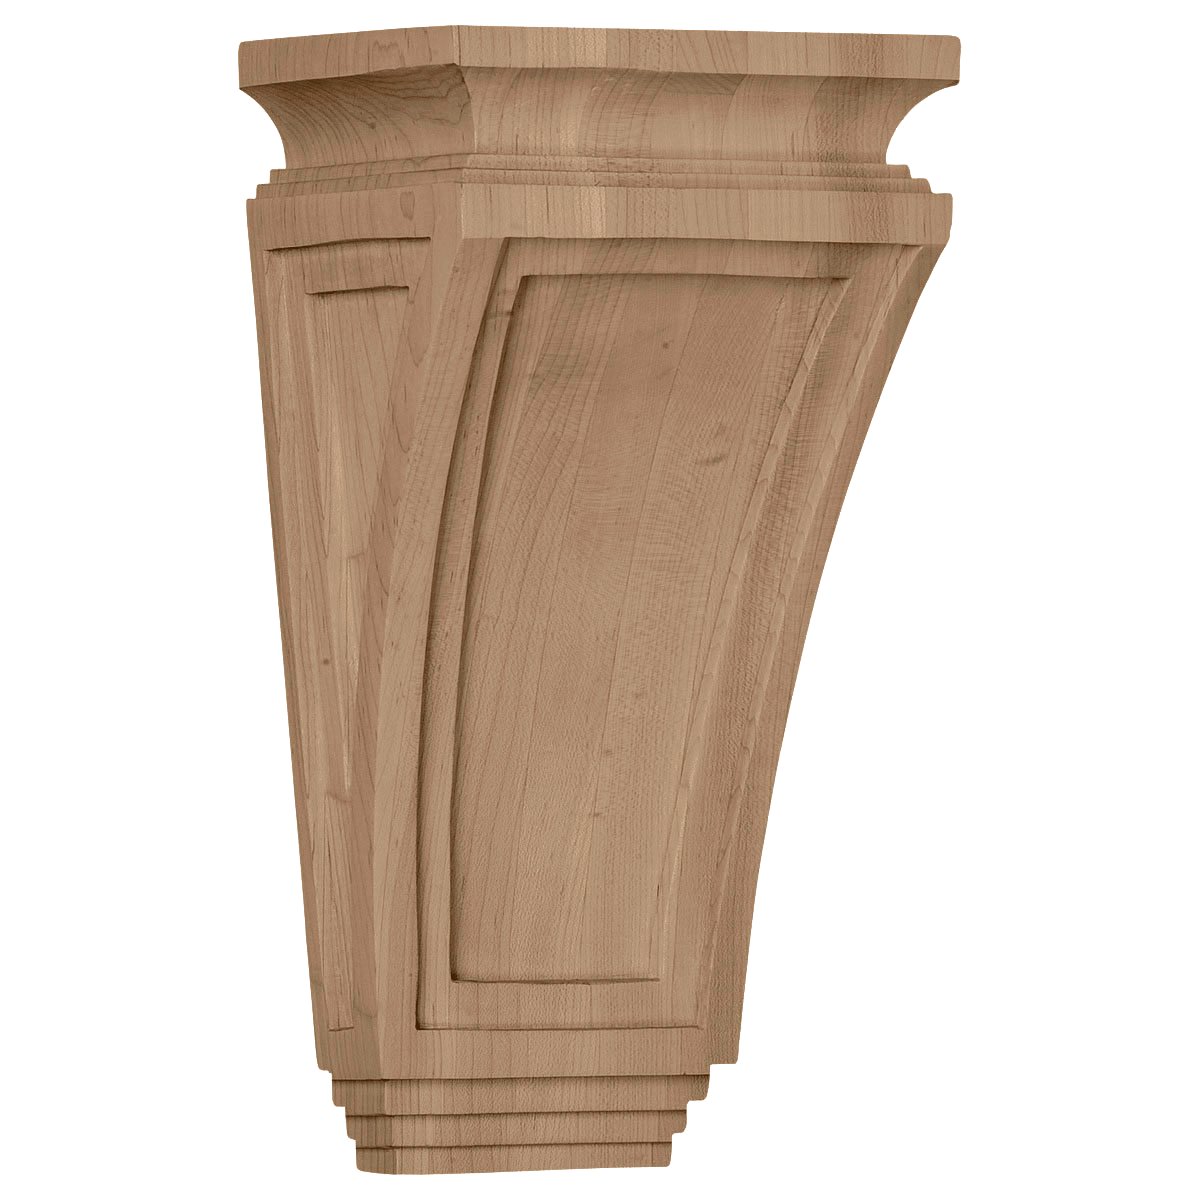 COR06X04X12AR Extra Large Arts and Crafts Corbel 6"W x 4 3/4"D x 12"H